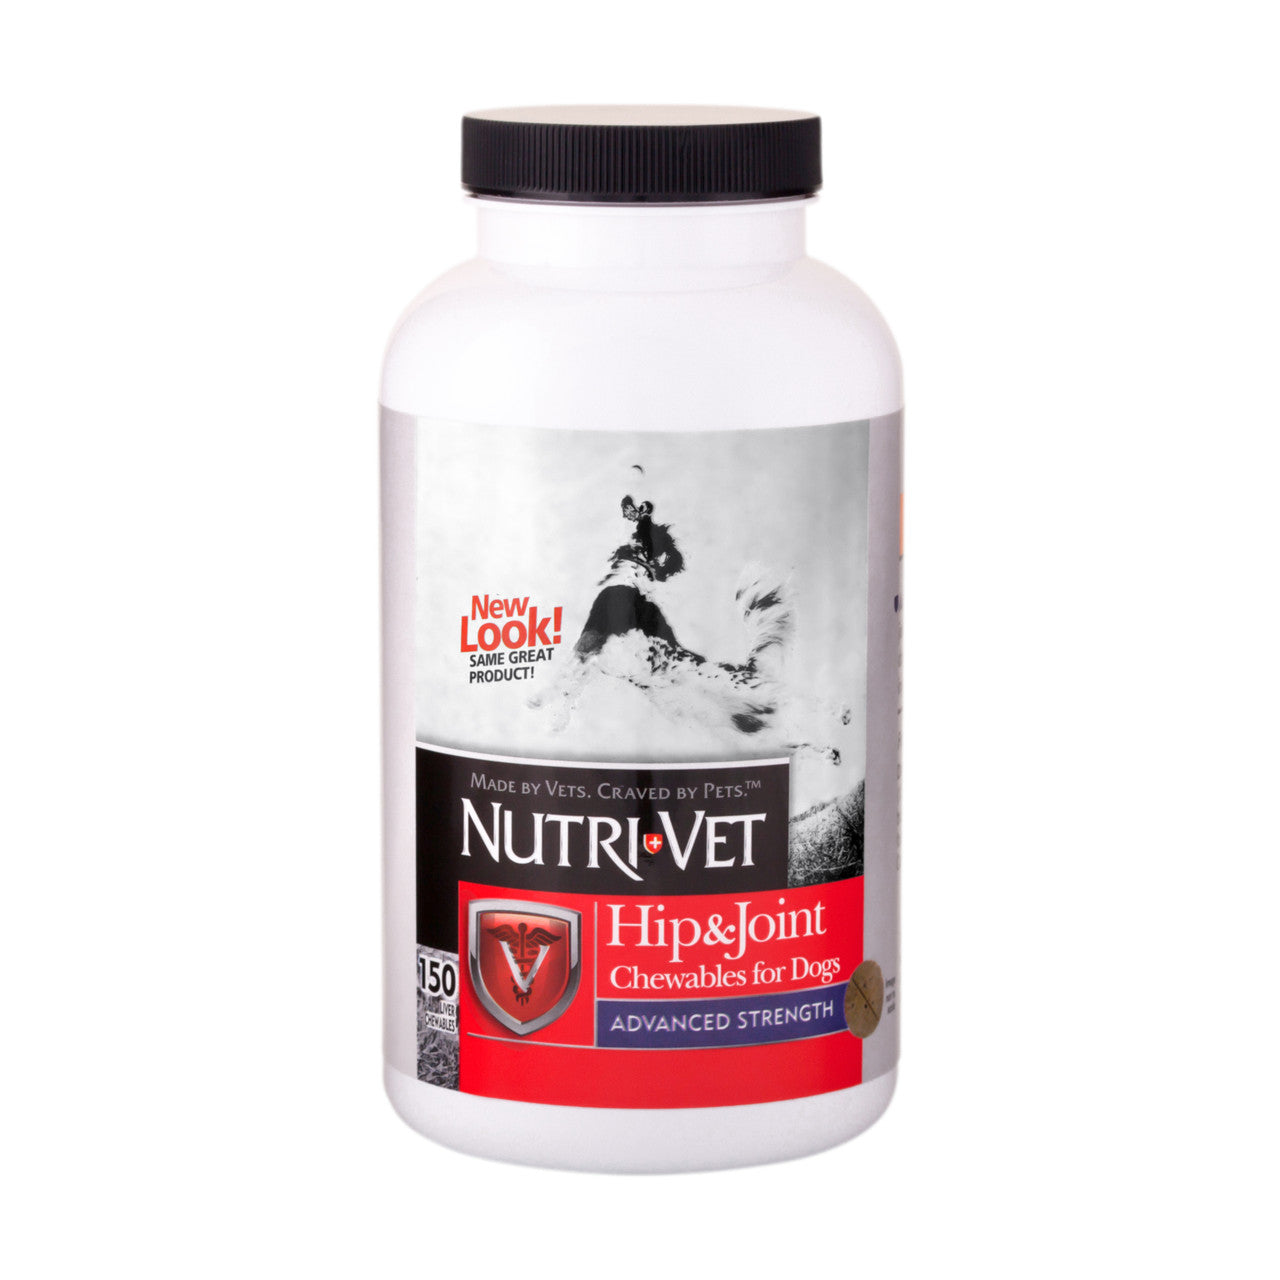 Nutri-Vet Hip & Joint Advanced Strength Chewables for Dogs - Liver Flavor 150ct